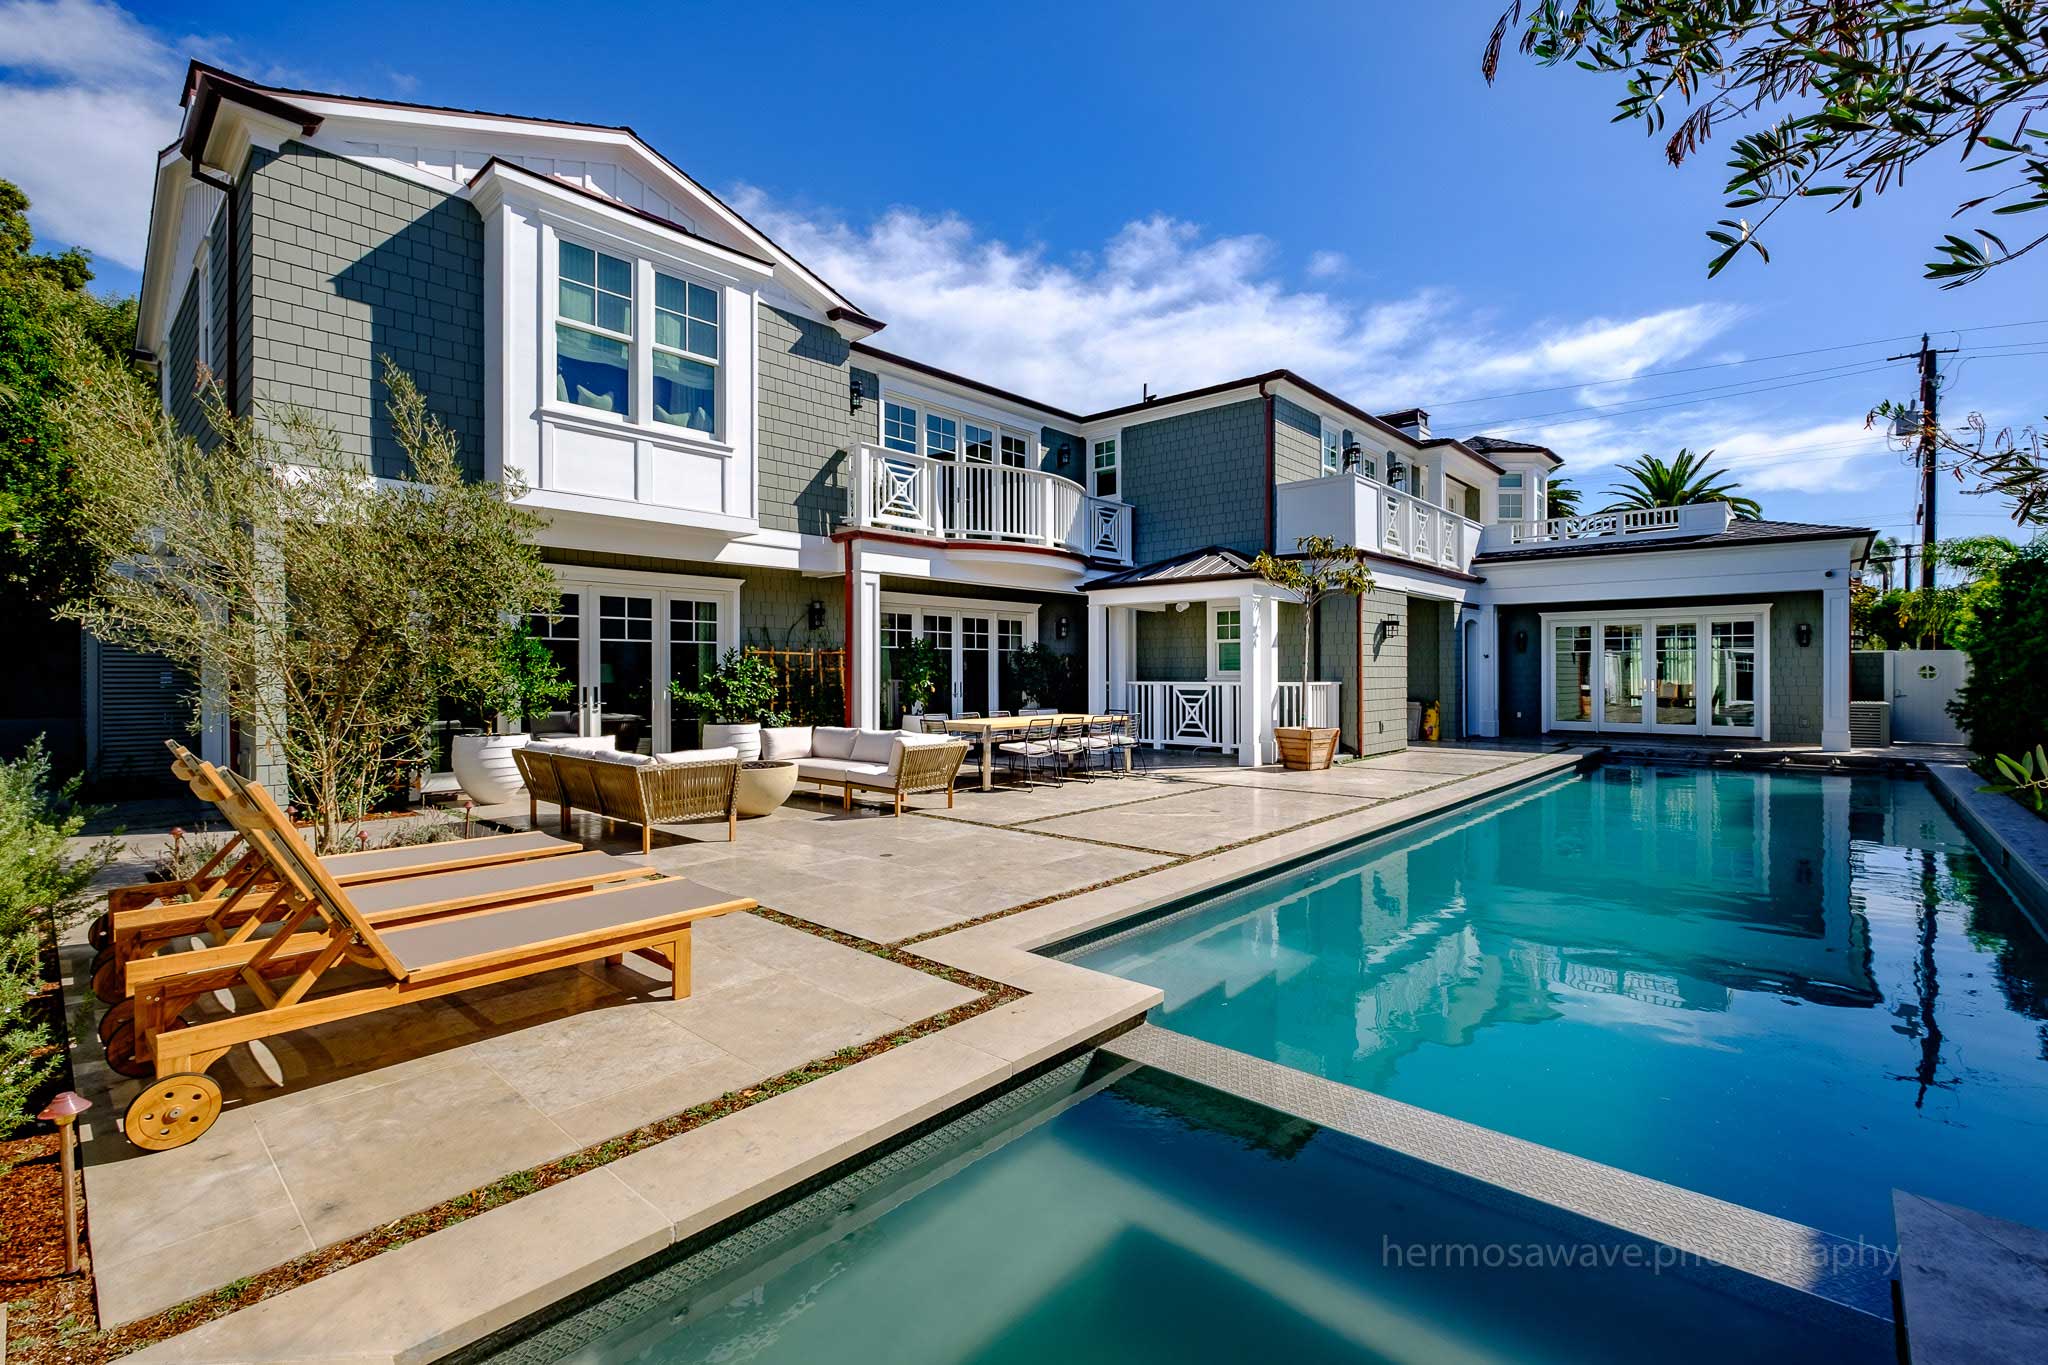 Pool is the central focus of this Manhattan Beach home.